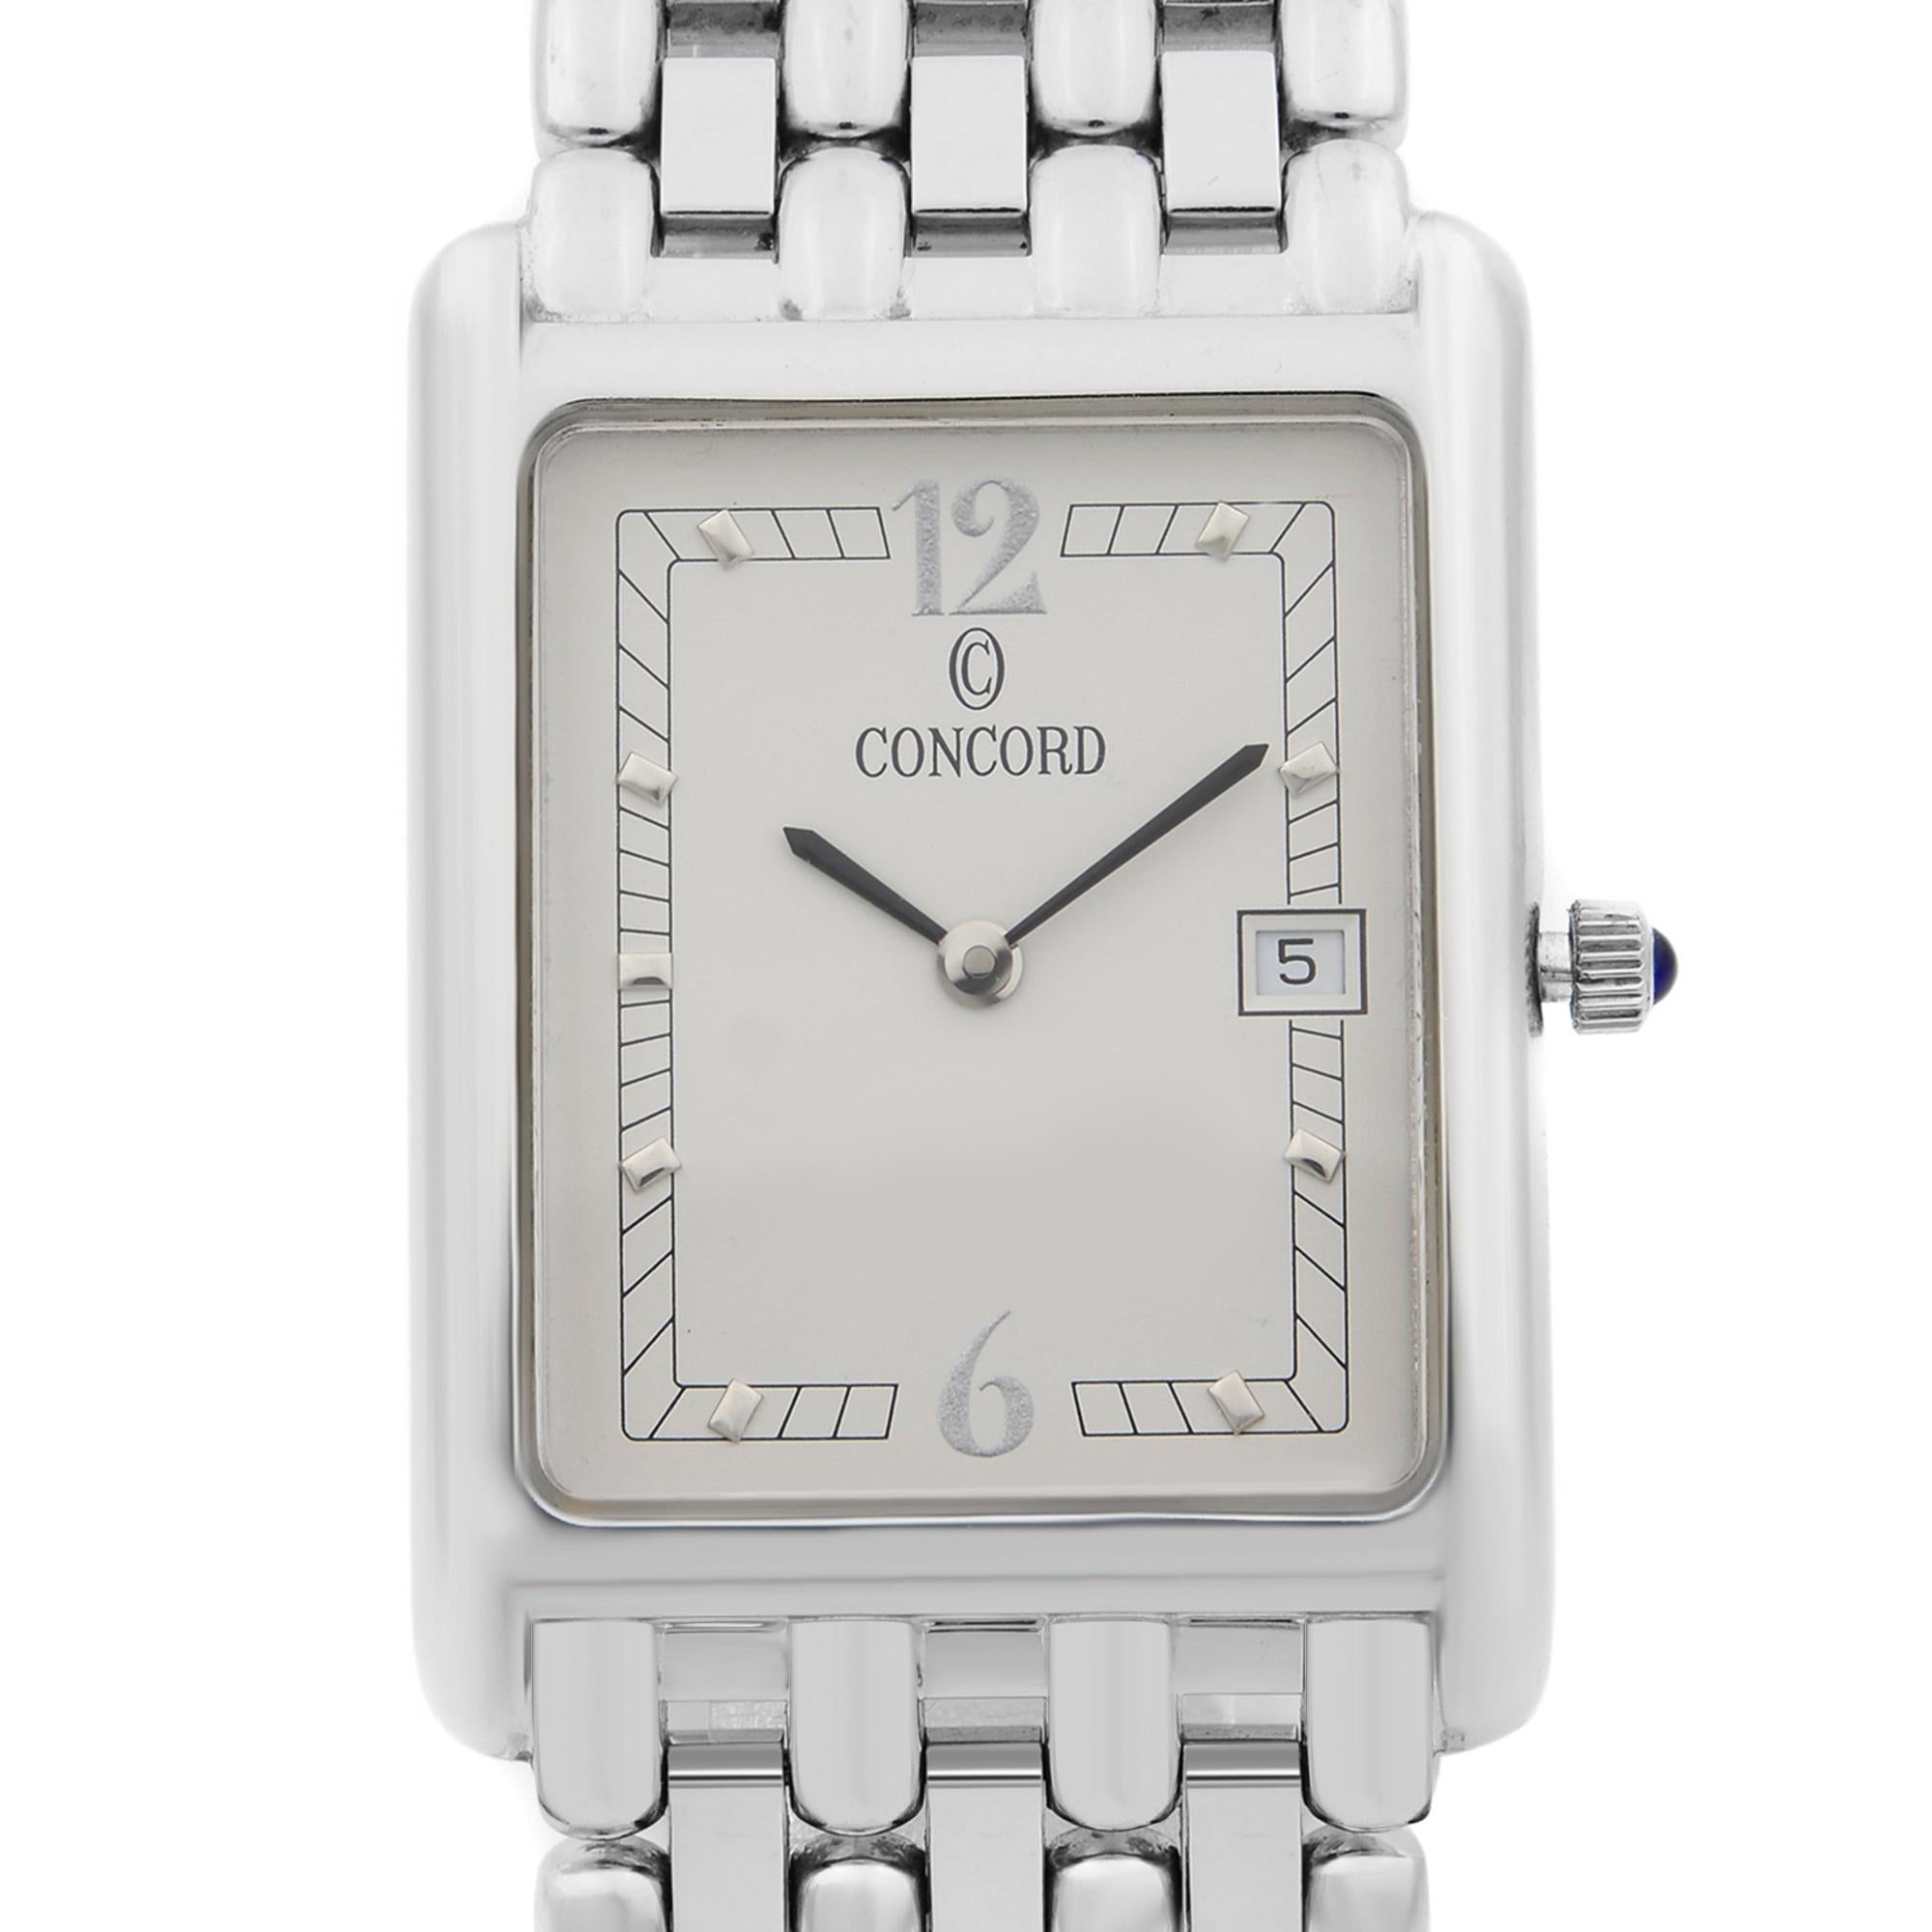 This pre-owned Concord Veneto 60-46-625 is a beautiful men's timepiece that is powered by quartz (battery) movement which is cased in a white gold case. It has a rectangle shape face, date indicator dial and has hand arabic numerals, dots style